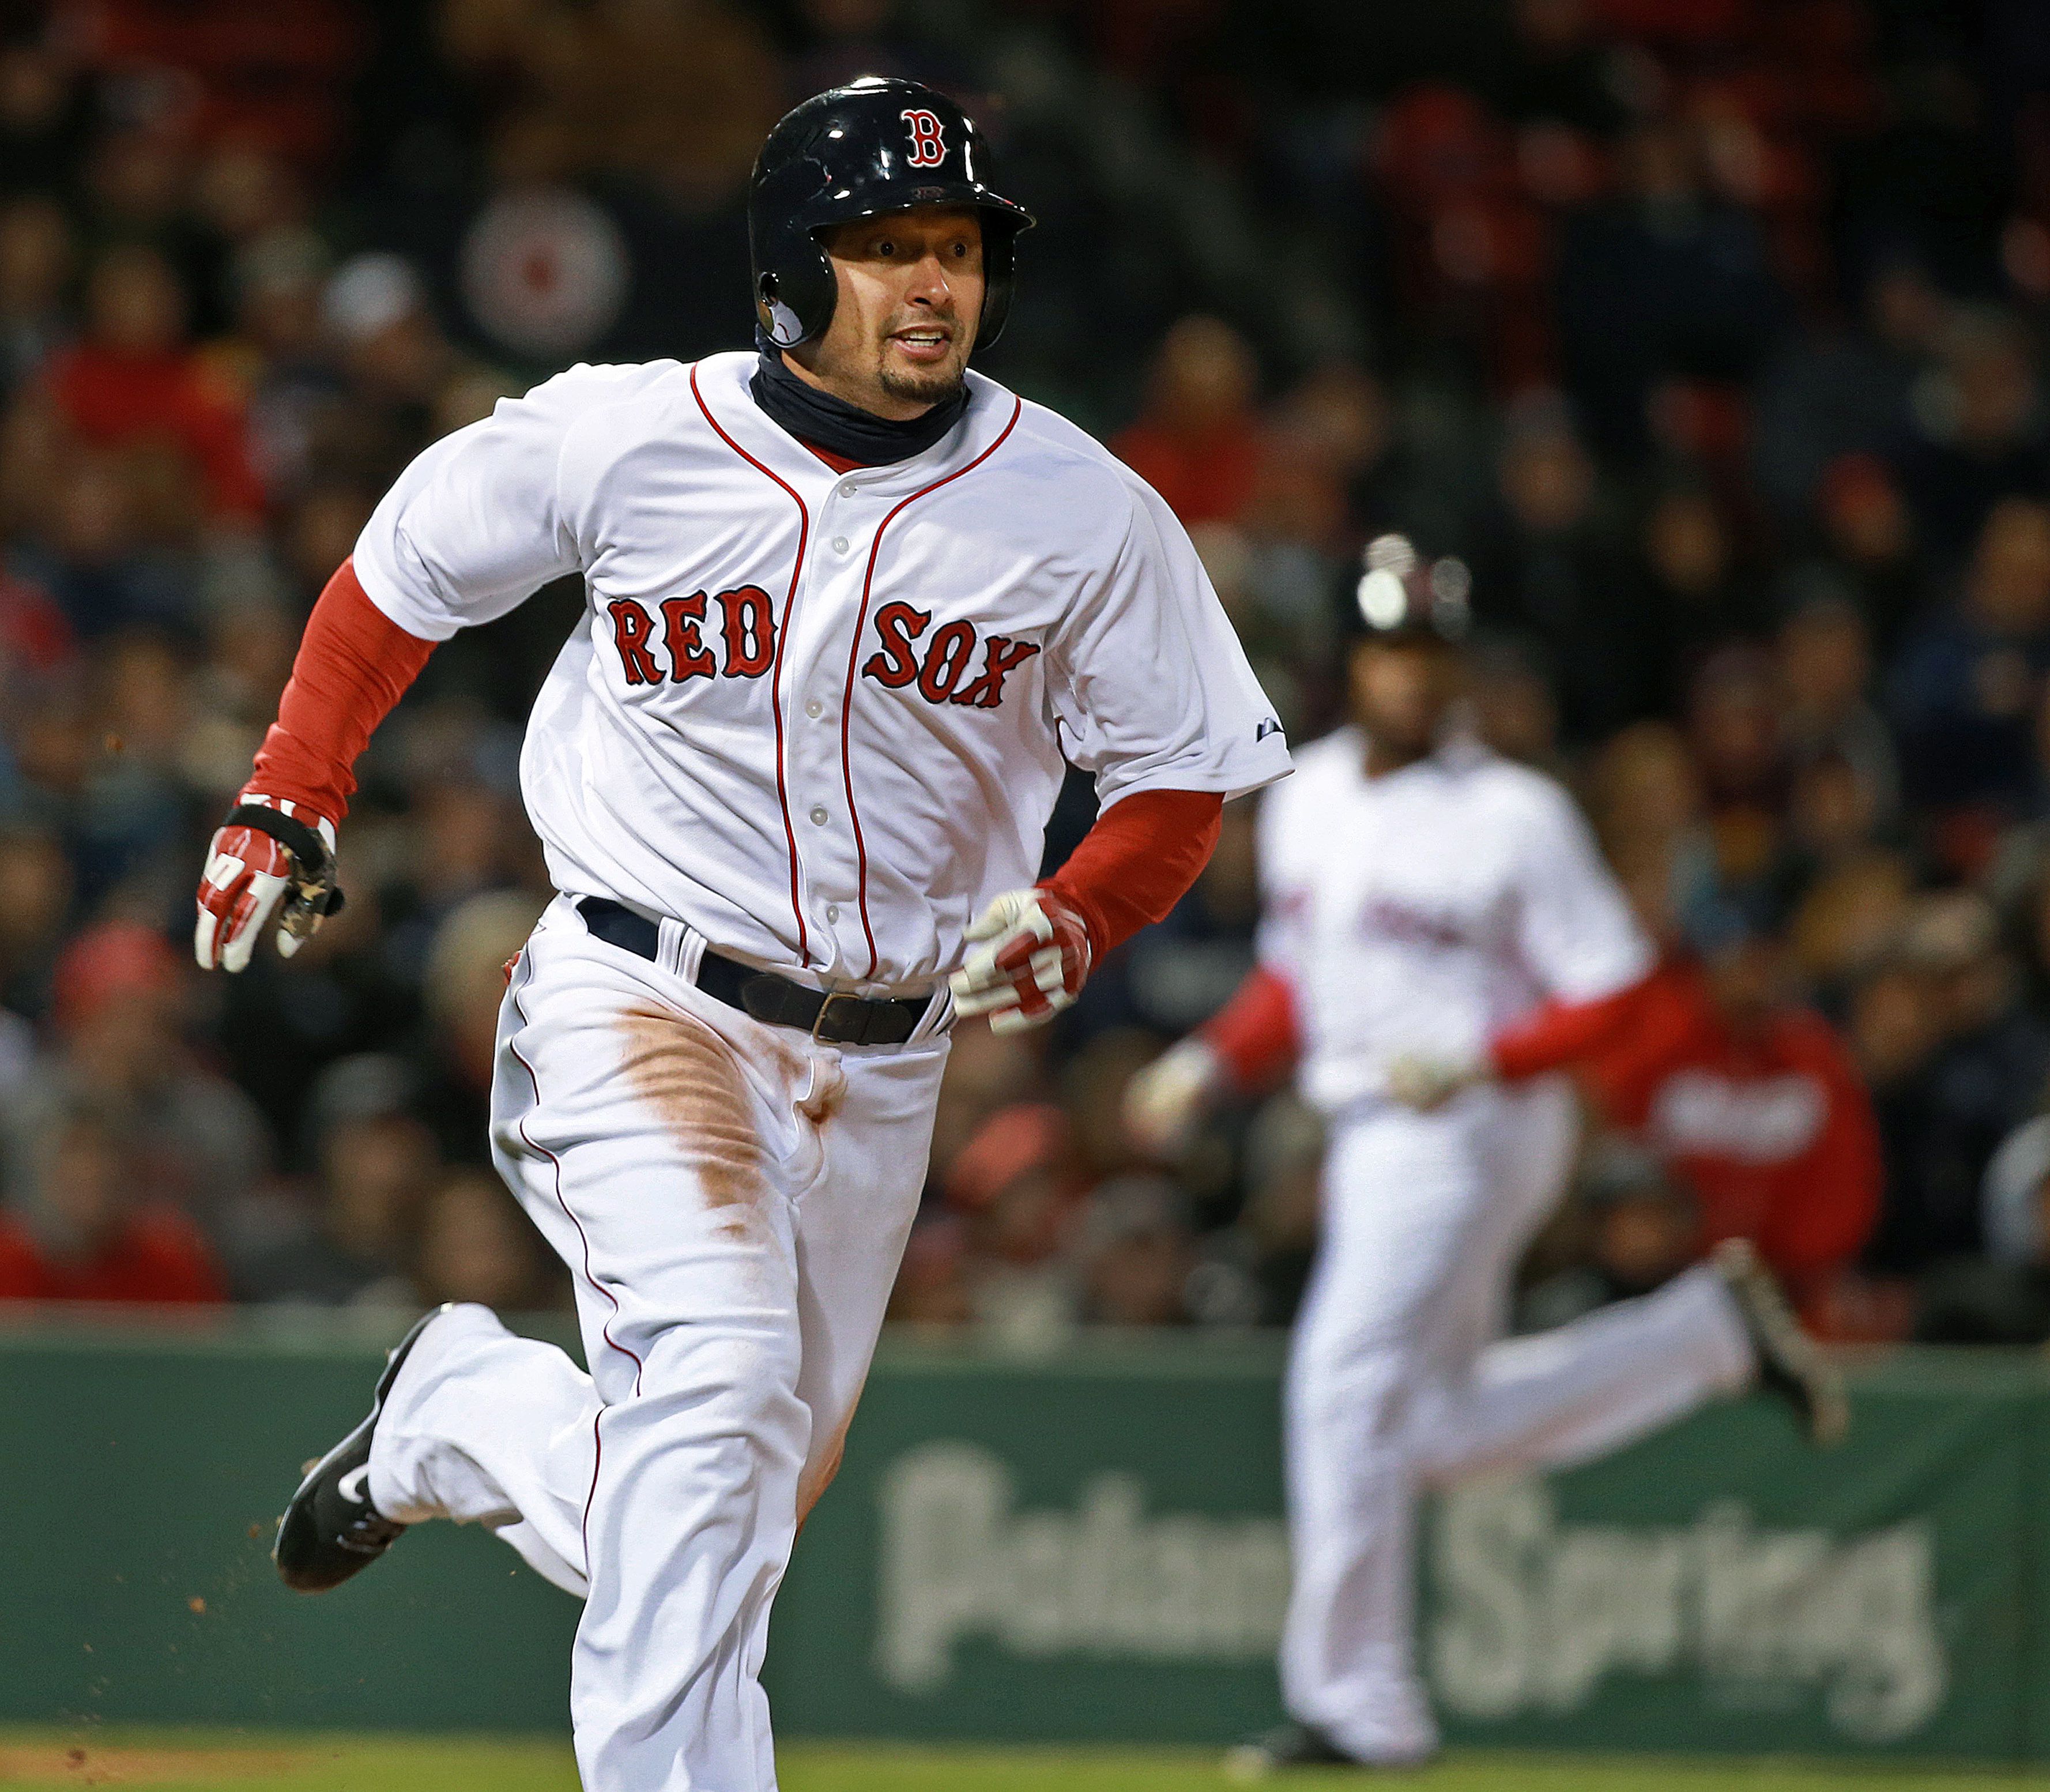 Shane Victorino agrees to 3-year deal with Red Sox - The Boston Globe